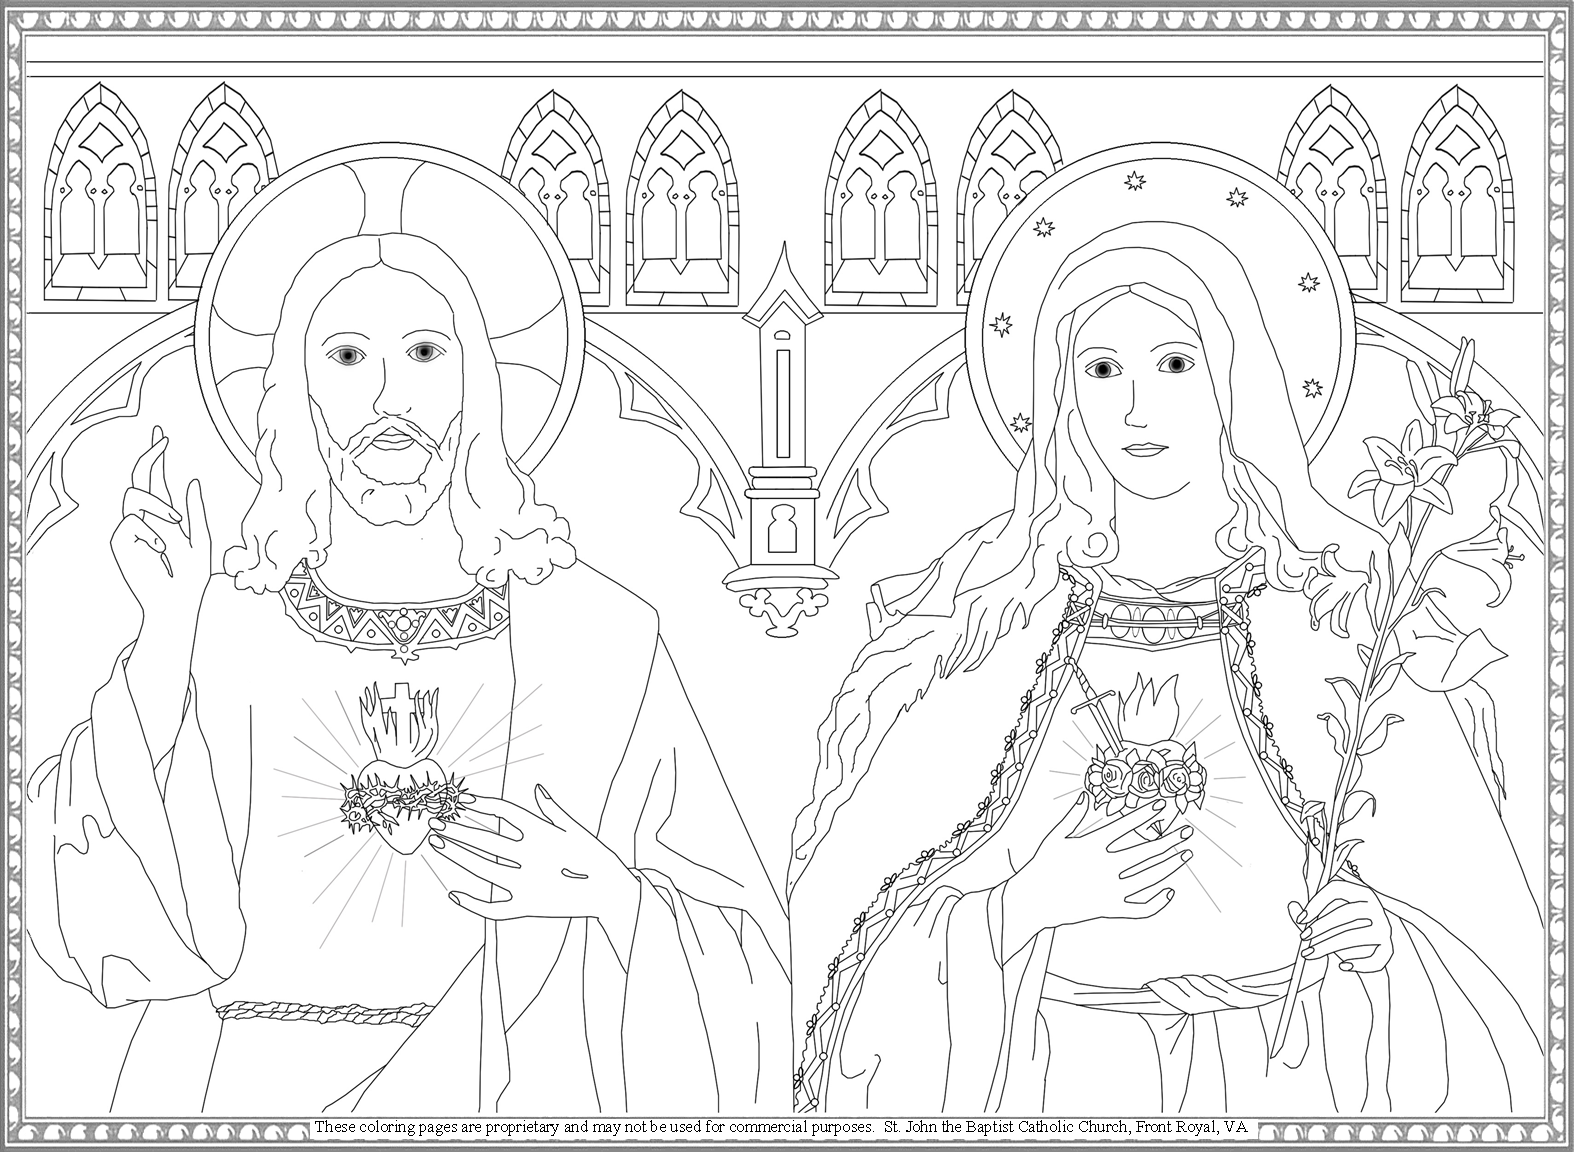 Sacred heart of jesus and immaculate heart of mary coloring page catholic coloring coloring pages catholic crafts